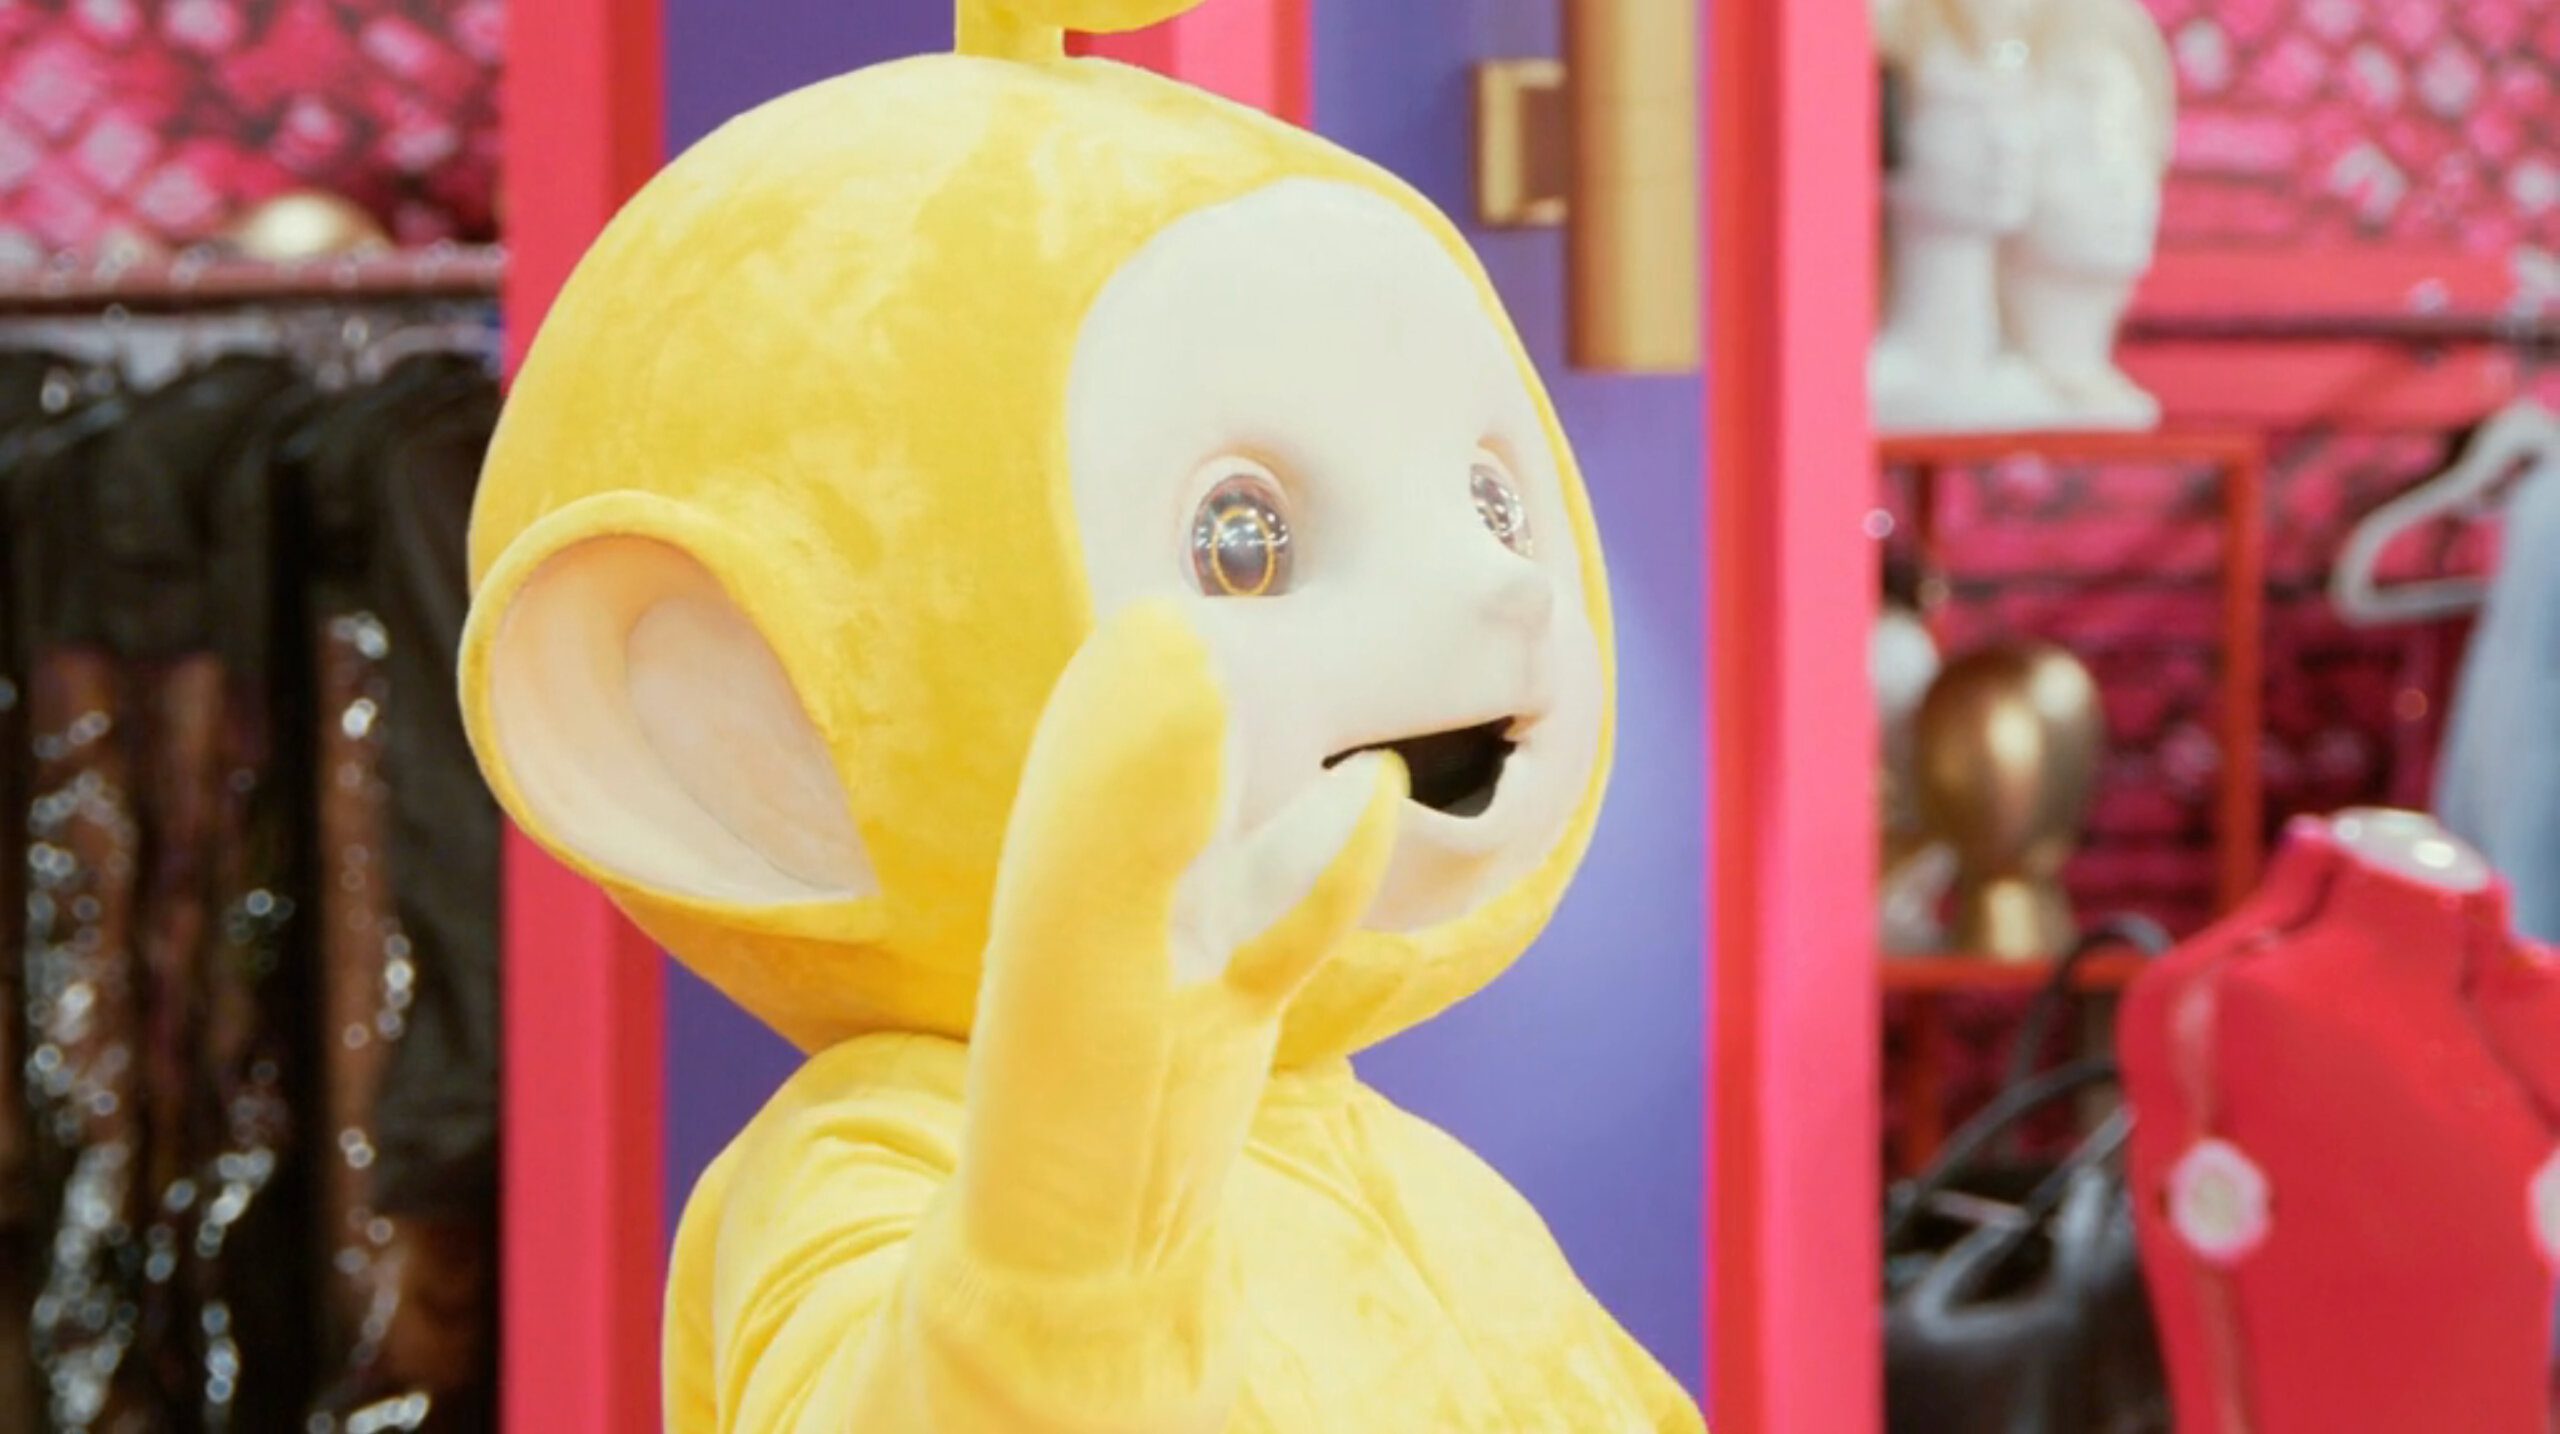 A yellow teletubby character with large ears and sparkling eyes waving, set against a colorful backdrop with clothing and mannequins in a scene from RuPaul's Drag Race All-Stars Season 9 Episode 5.